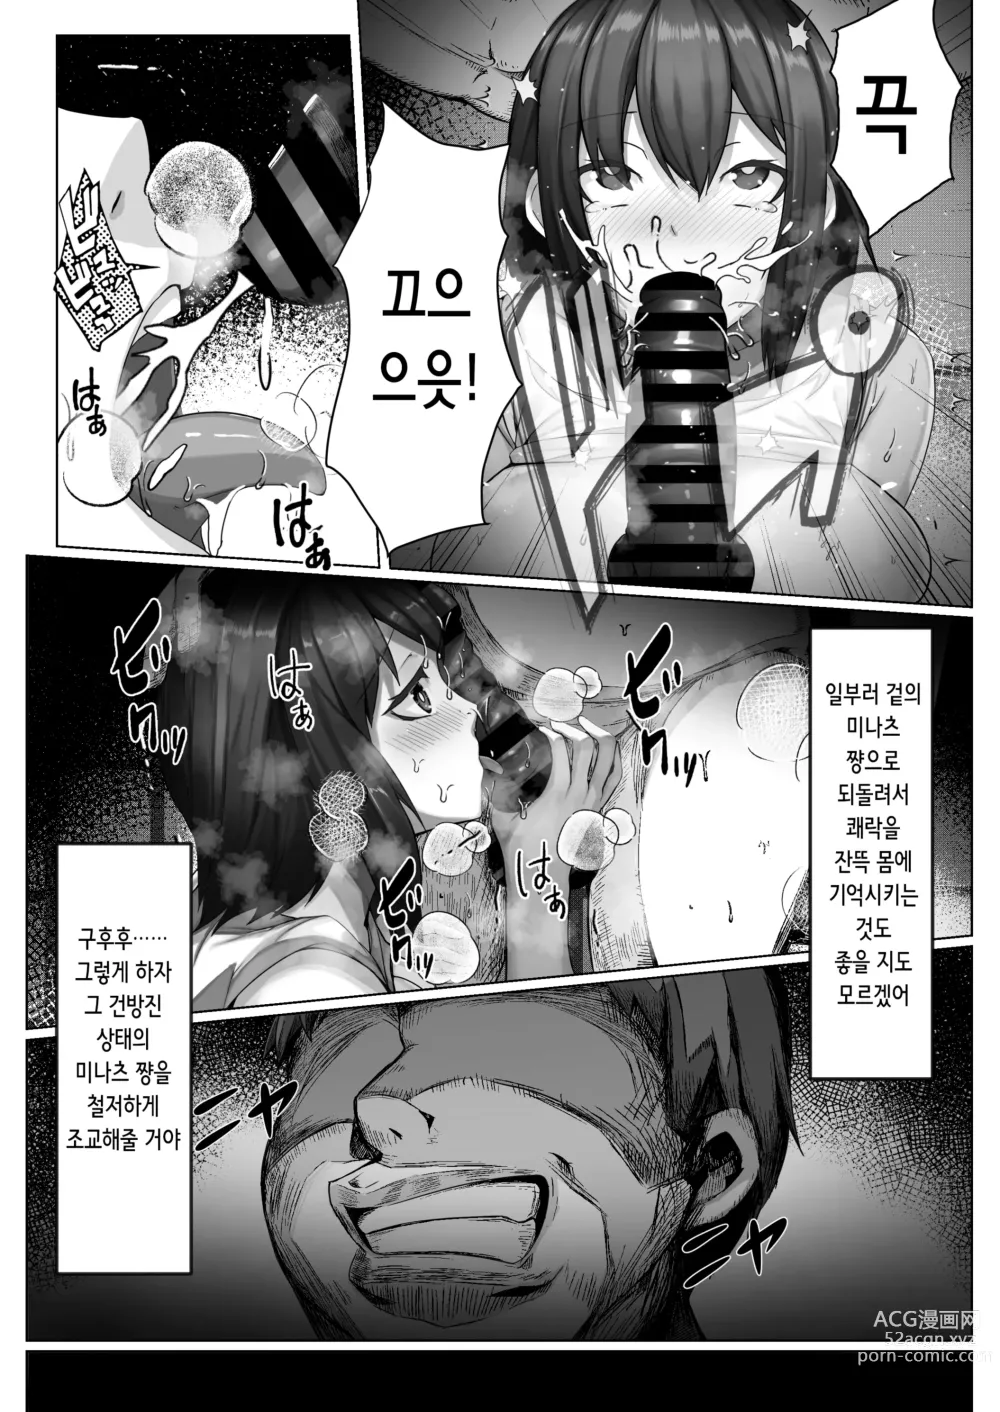 Page 6 of doujinshi 최면 이웃 JD 2